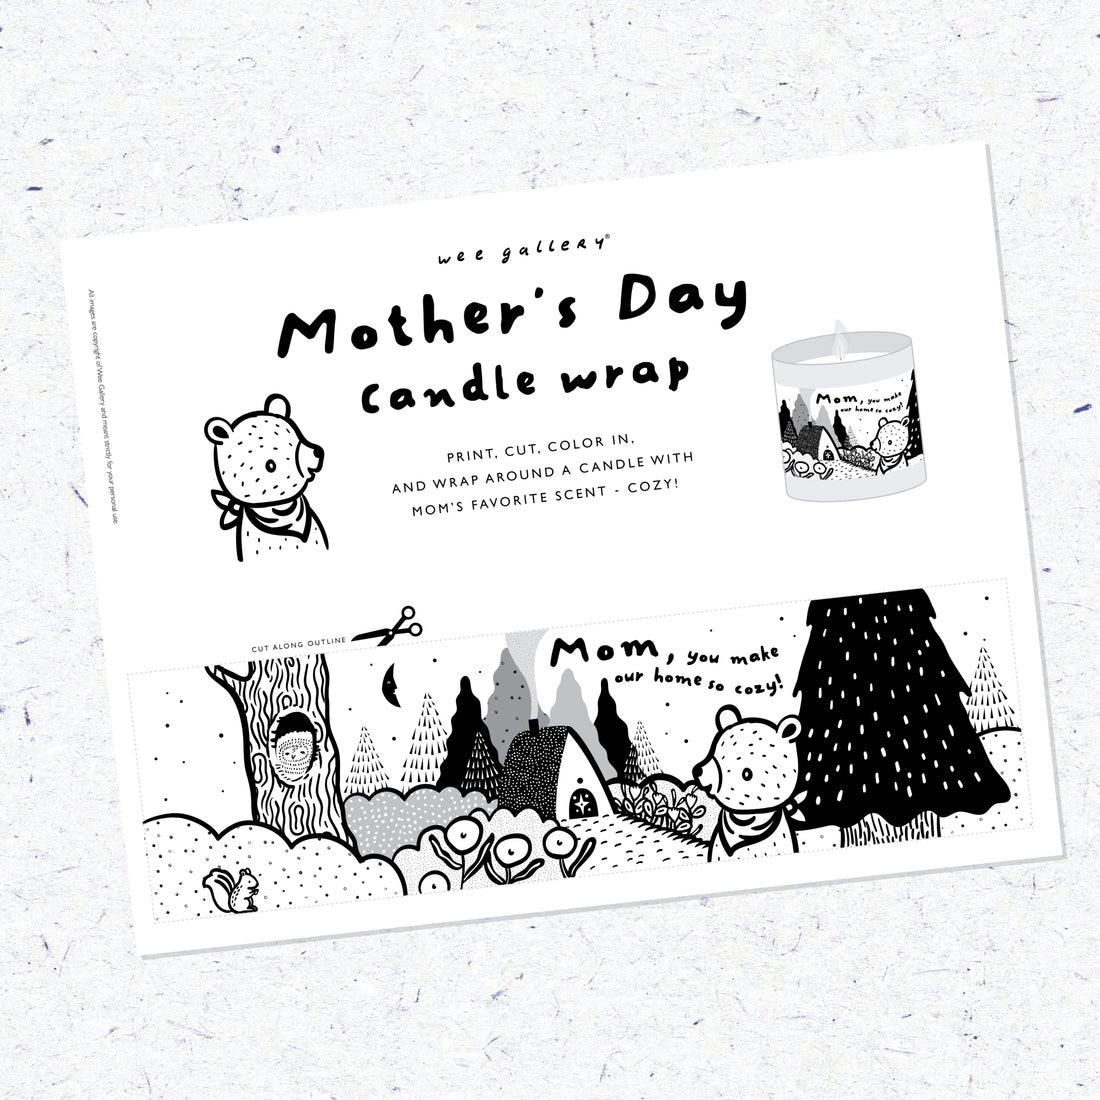 Mother's Day Candle Wrap Craft Freebies Wee Gallery   